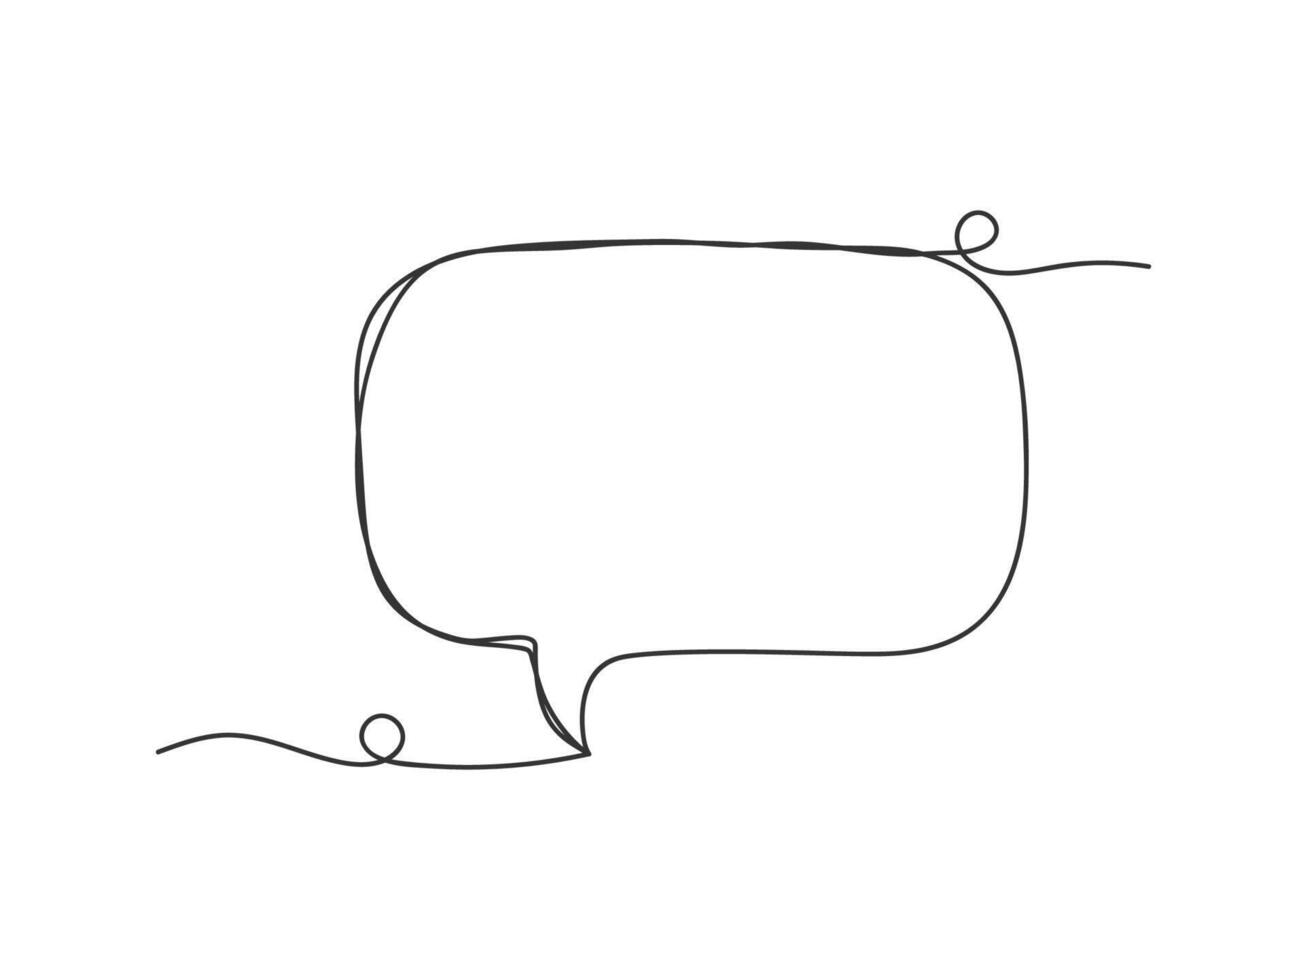 Speech bubble in continuous one line drawing isolated vector illustration.